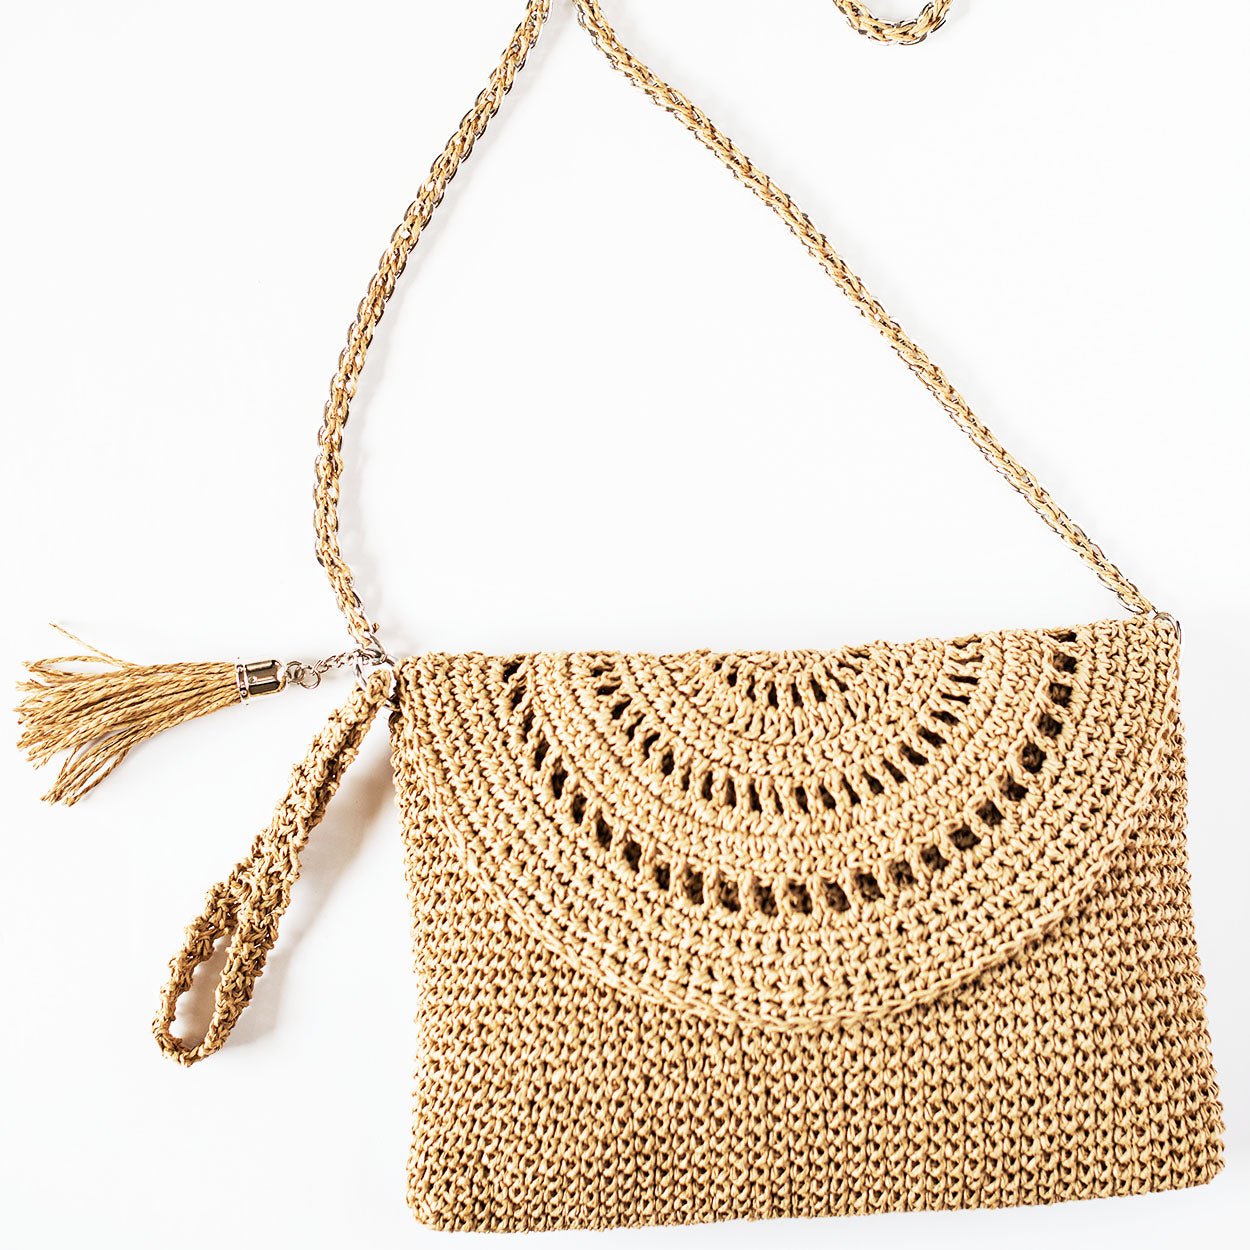 Grace Bag hand crocheted with sustainable paper yarn - Sand - SJW BAGS LONDON